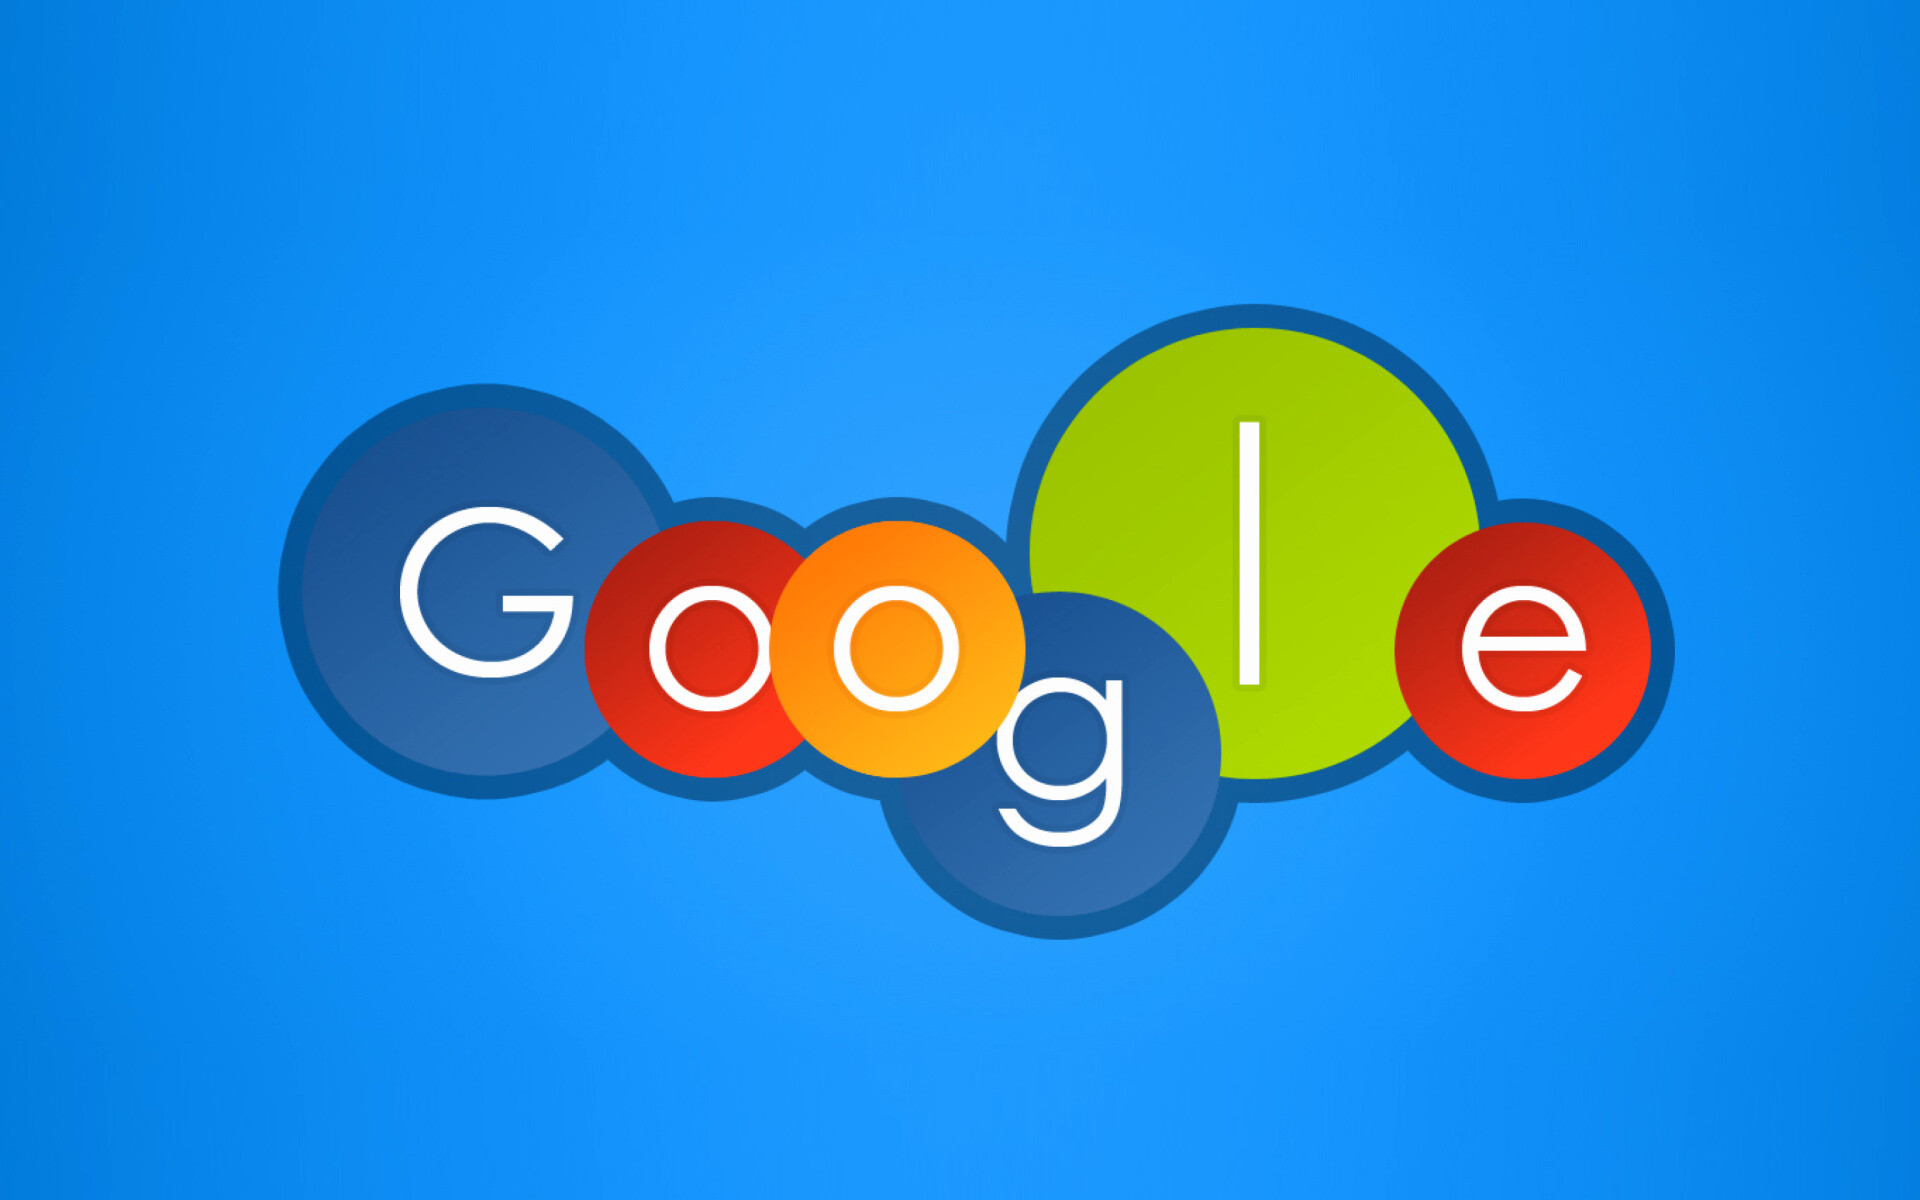 Google: Has been referred to as "the most powerful company in the world". 1920x1200 HD Wallpaper.